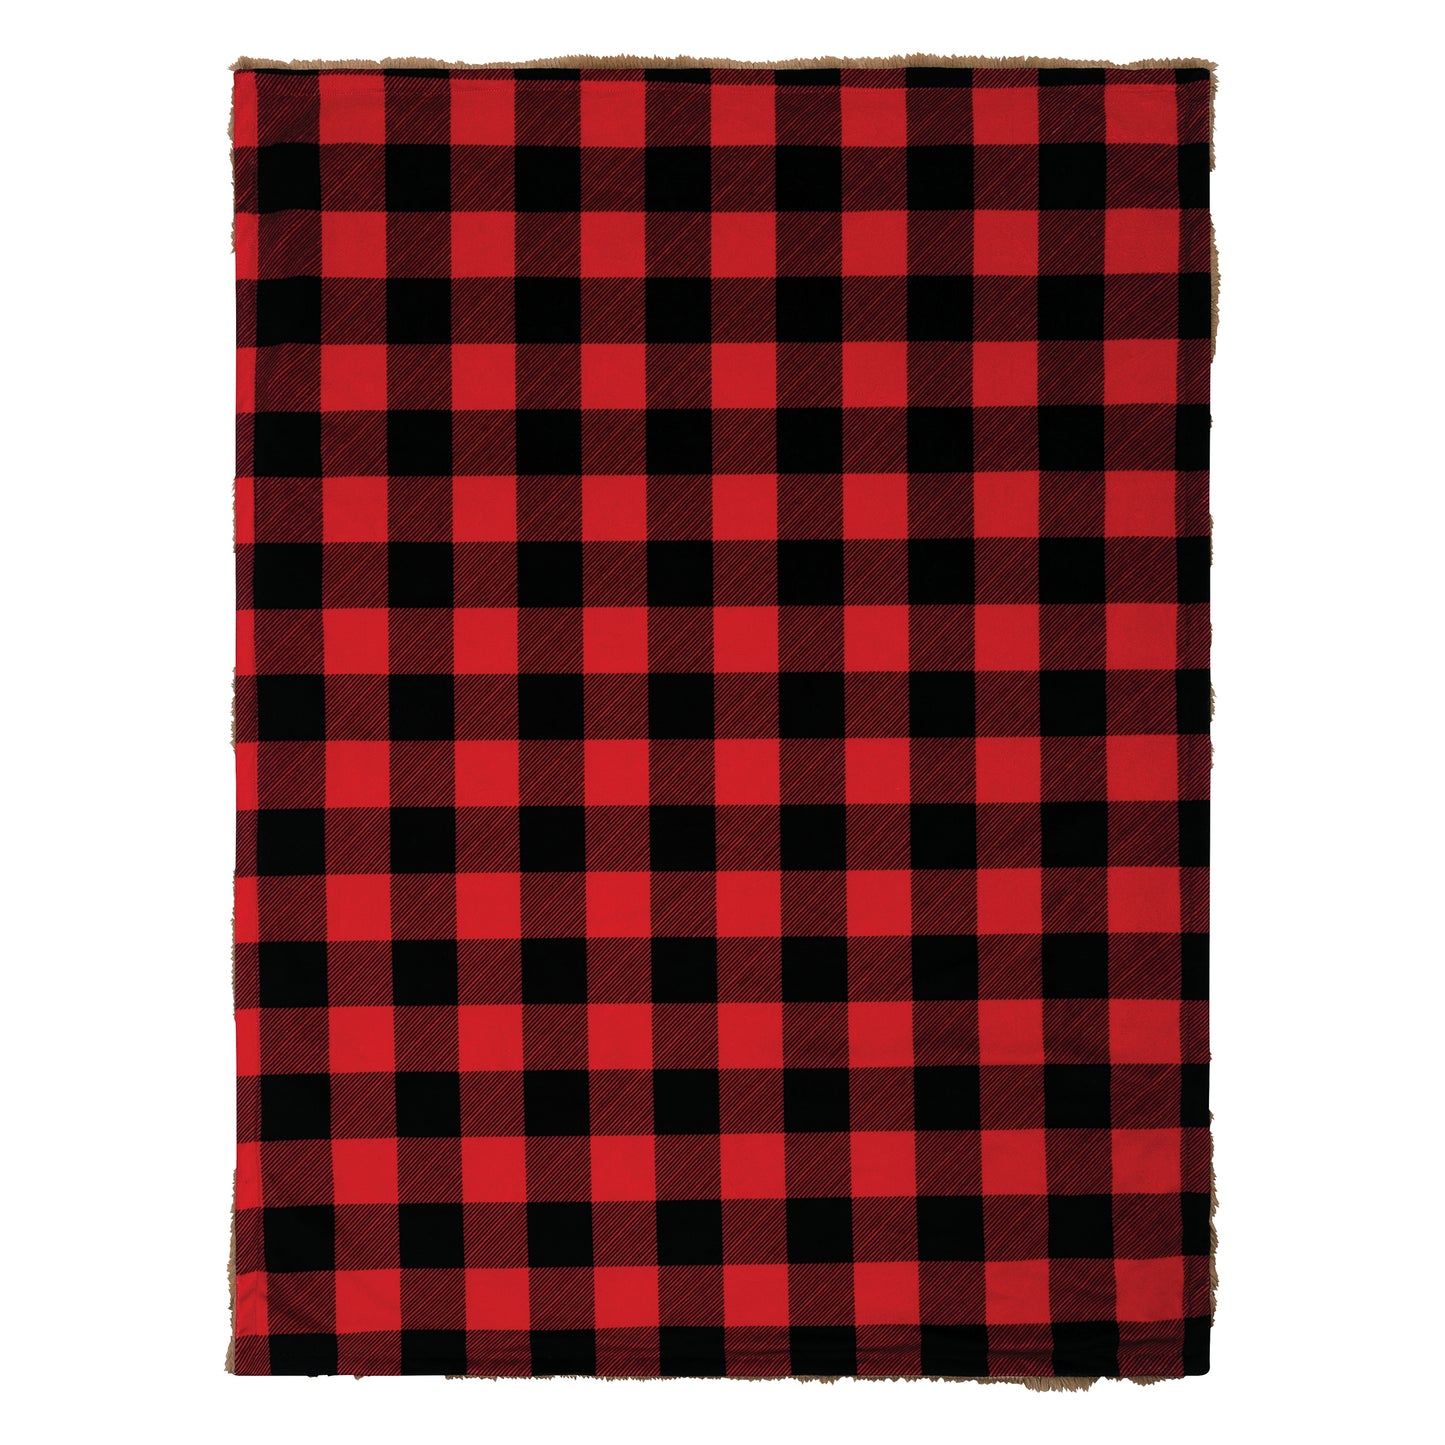  Buffalo Check Plush Baby Blanket - laid out view